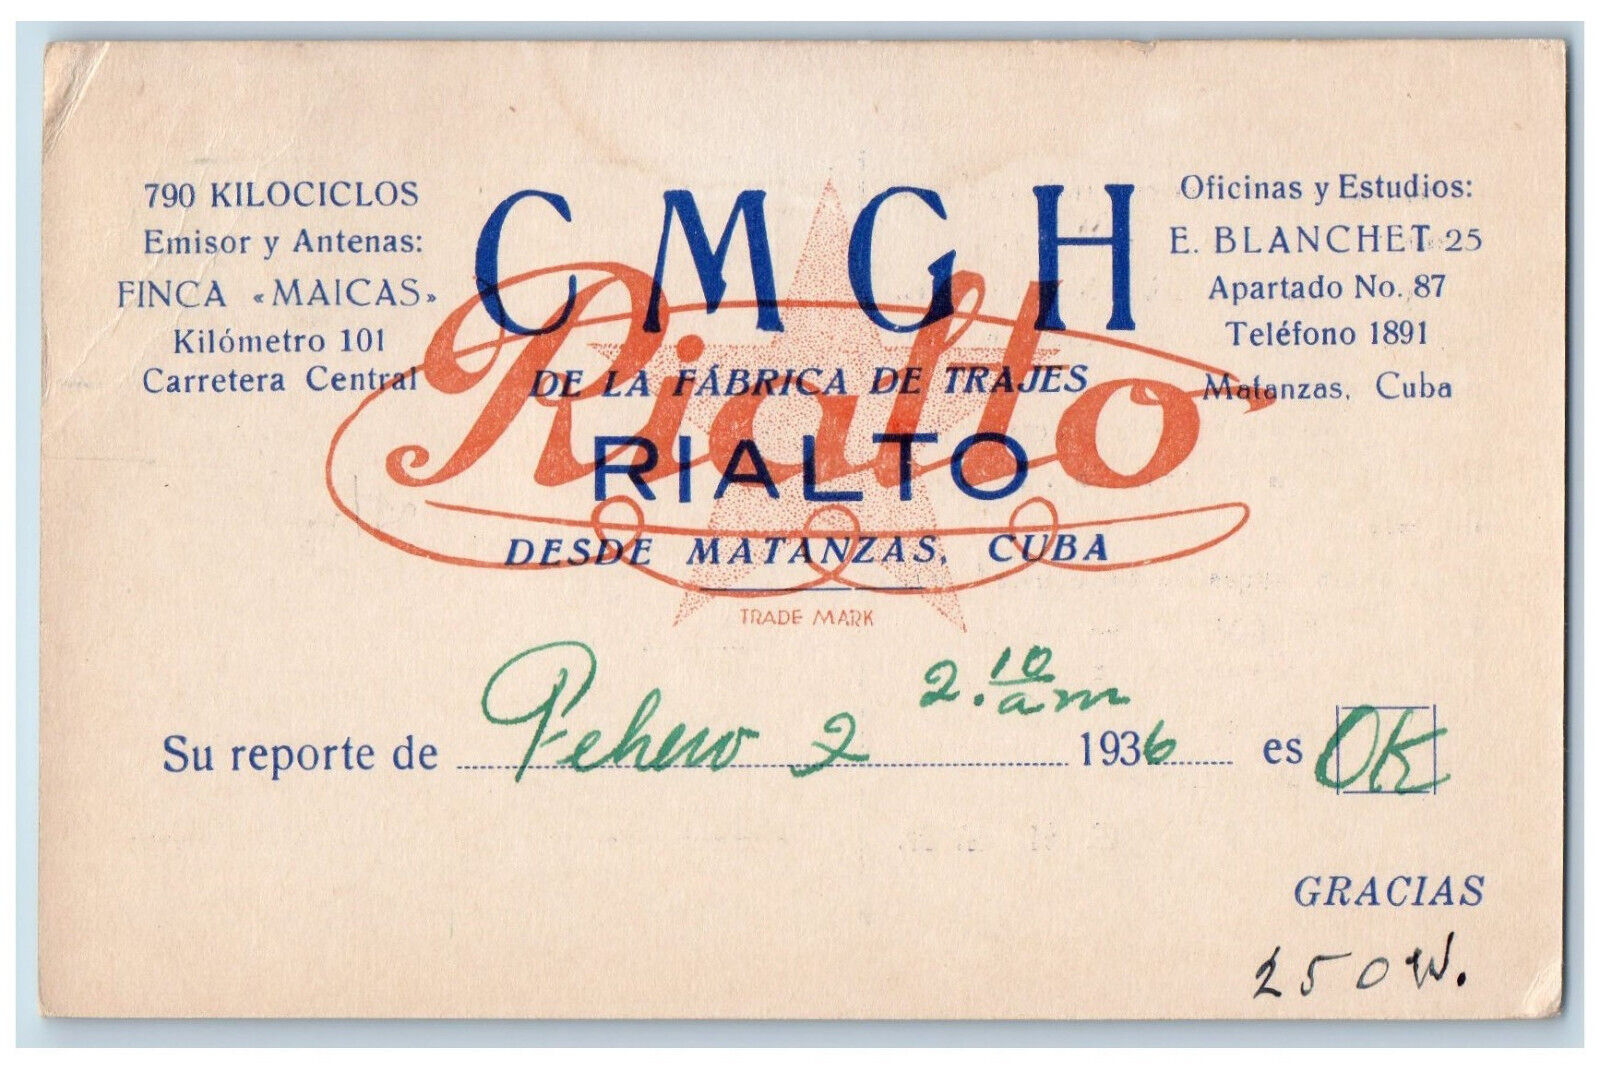 Desde Matanzas Postal Card CMCH From the Suit Factory 1936 Posted Vintage